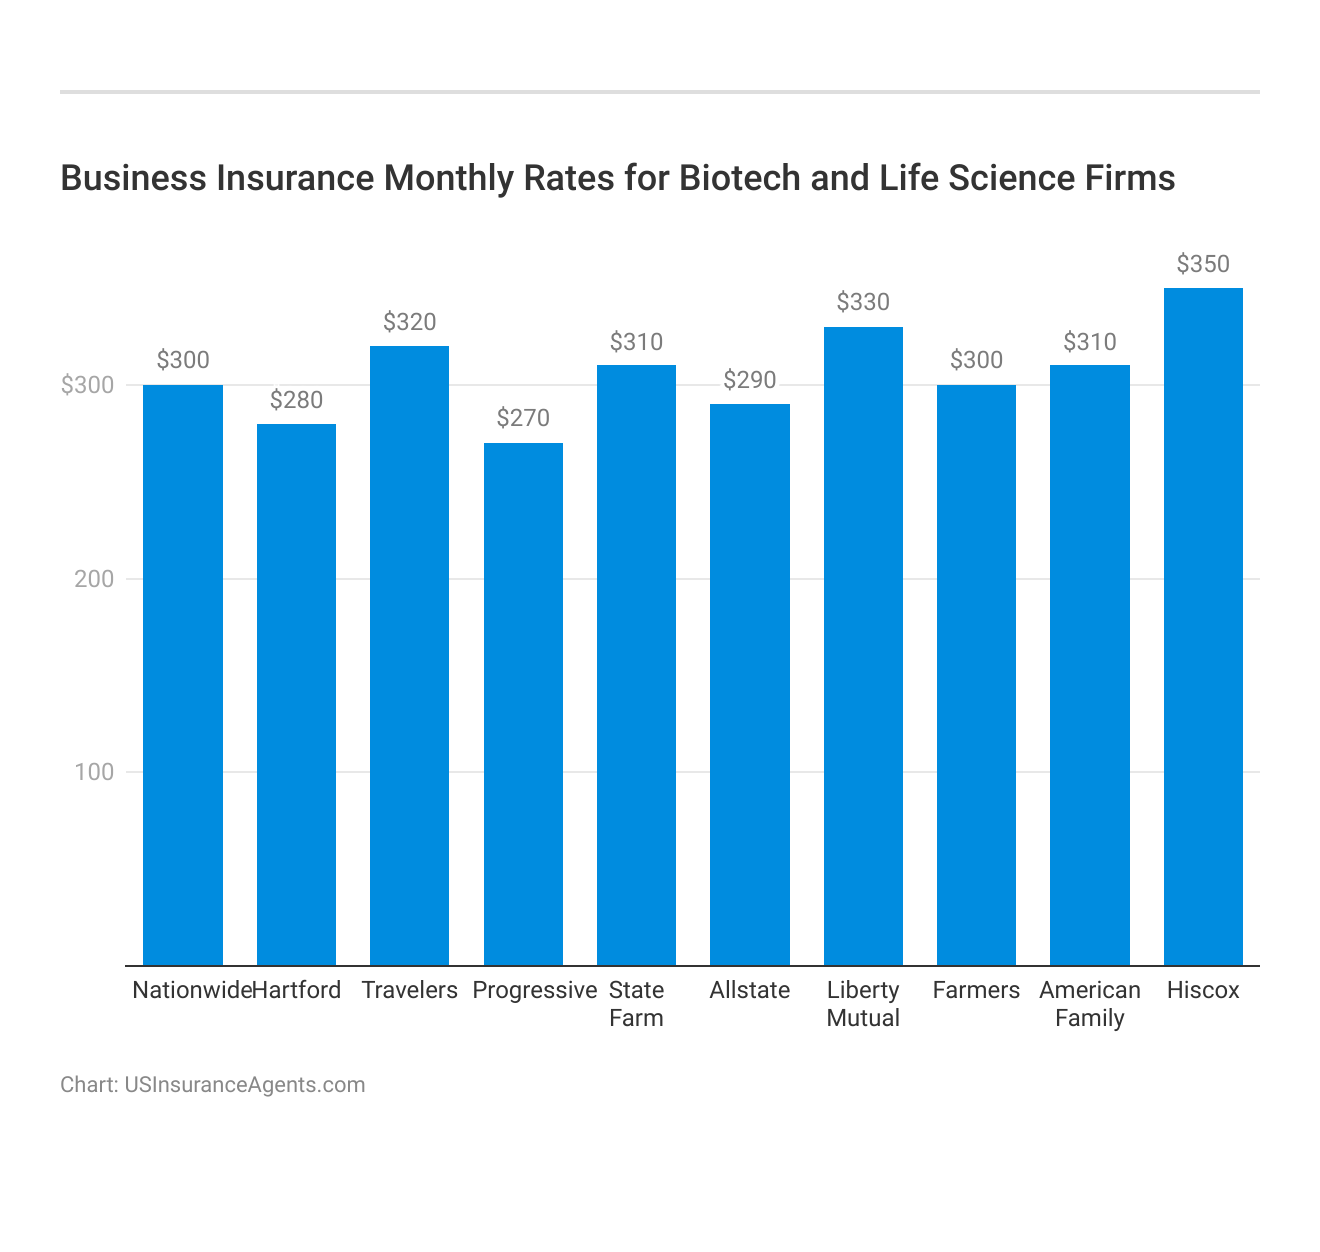 <h3>Business Insurance Monthly Rates for Biotech and Life Science Firms</h3>